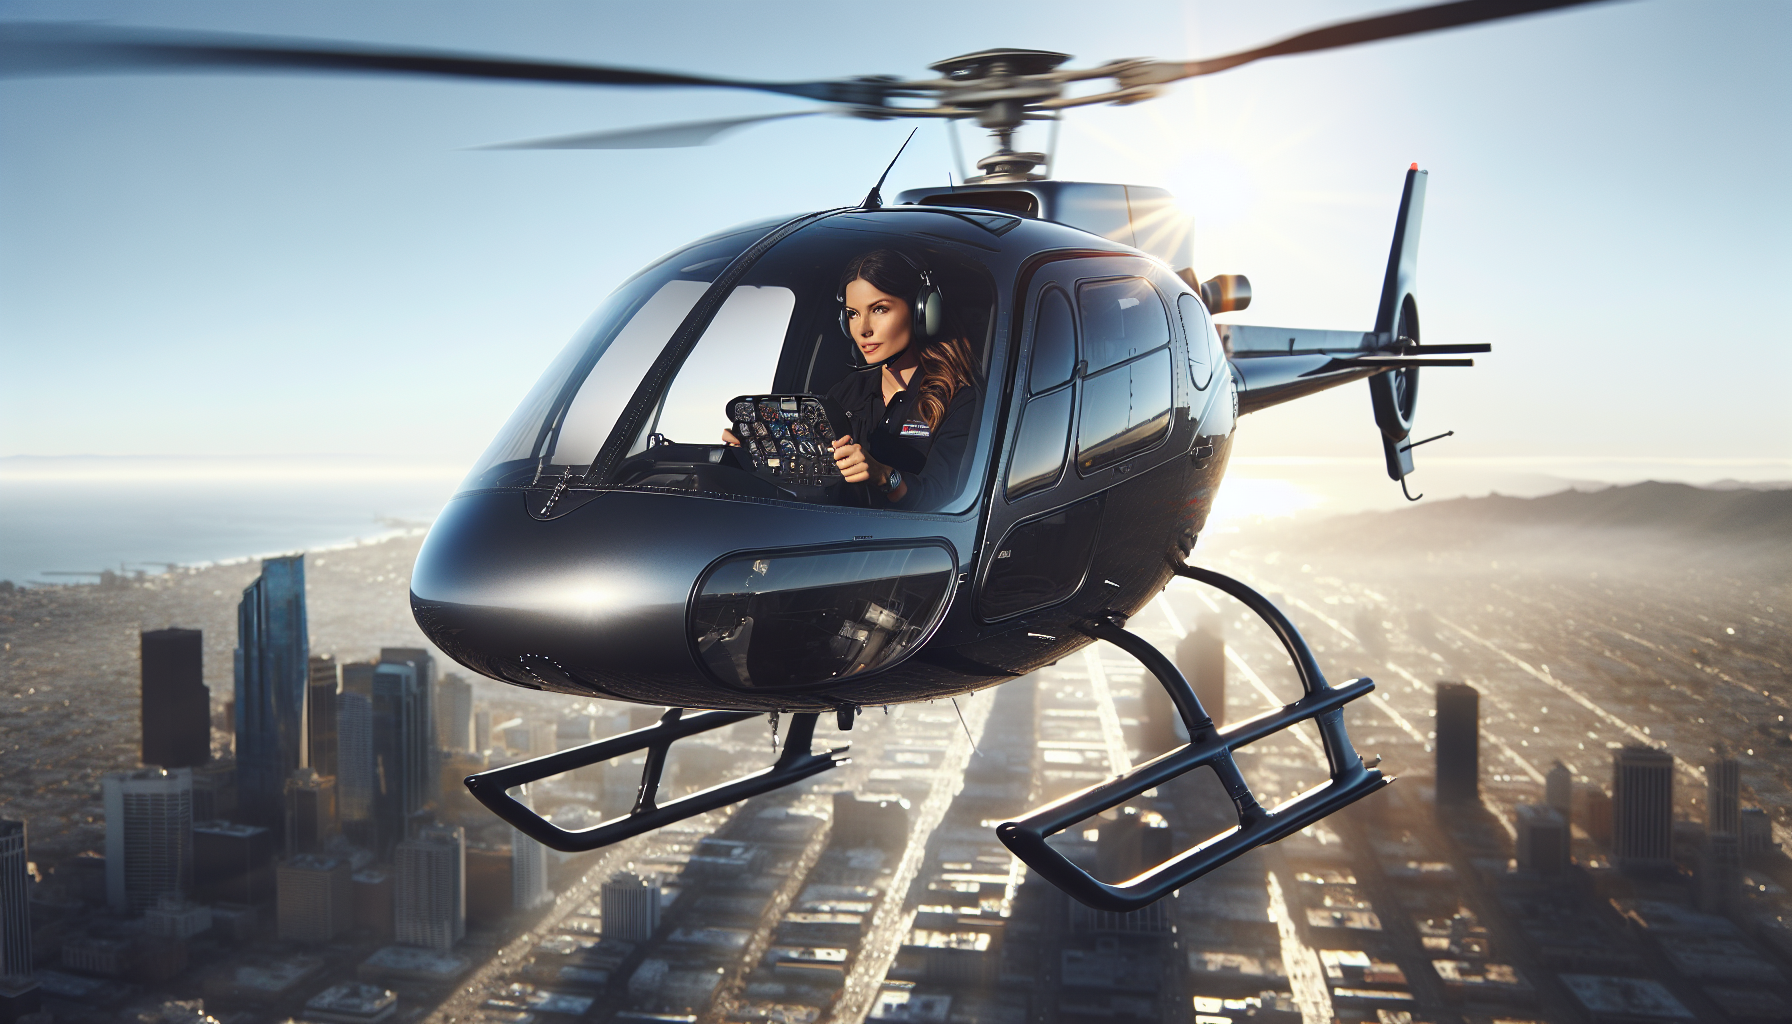 Commercial helicopter pilot license requirements